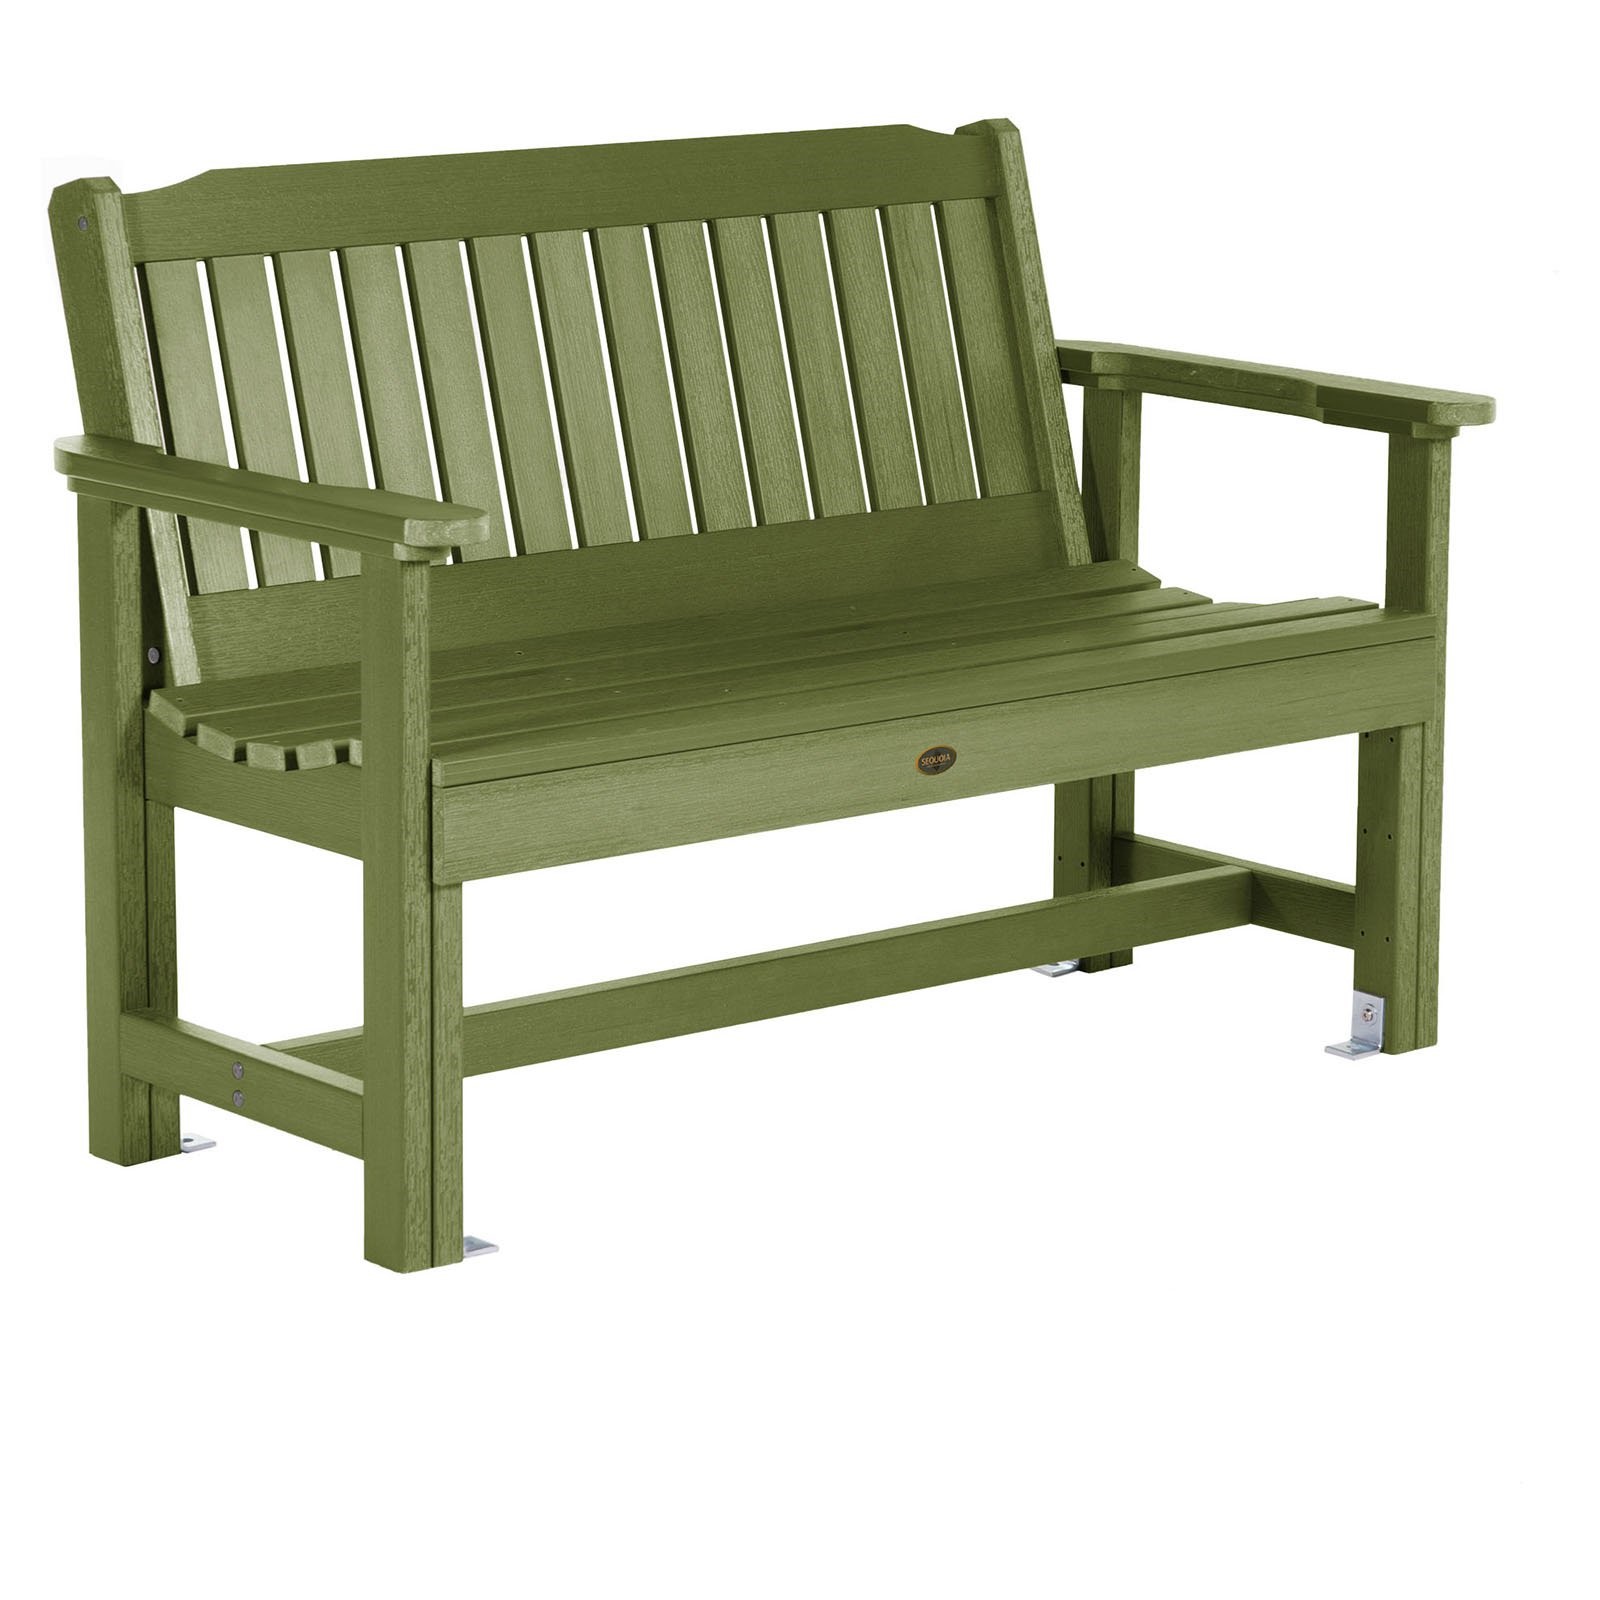 The Sequoia Professional Commercial Grade Exeter 6' Garden Bench - image 2 of 2